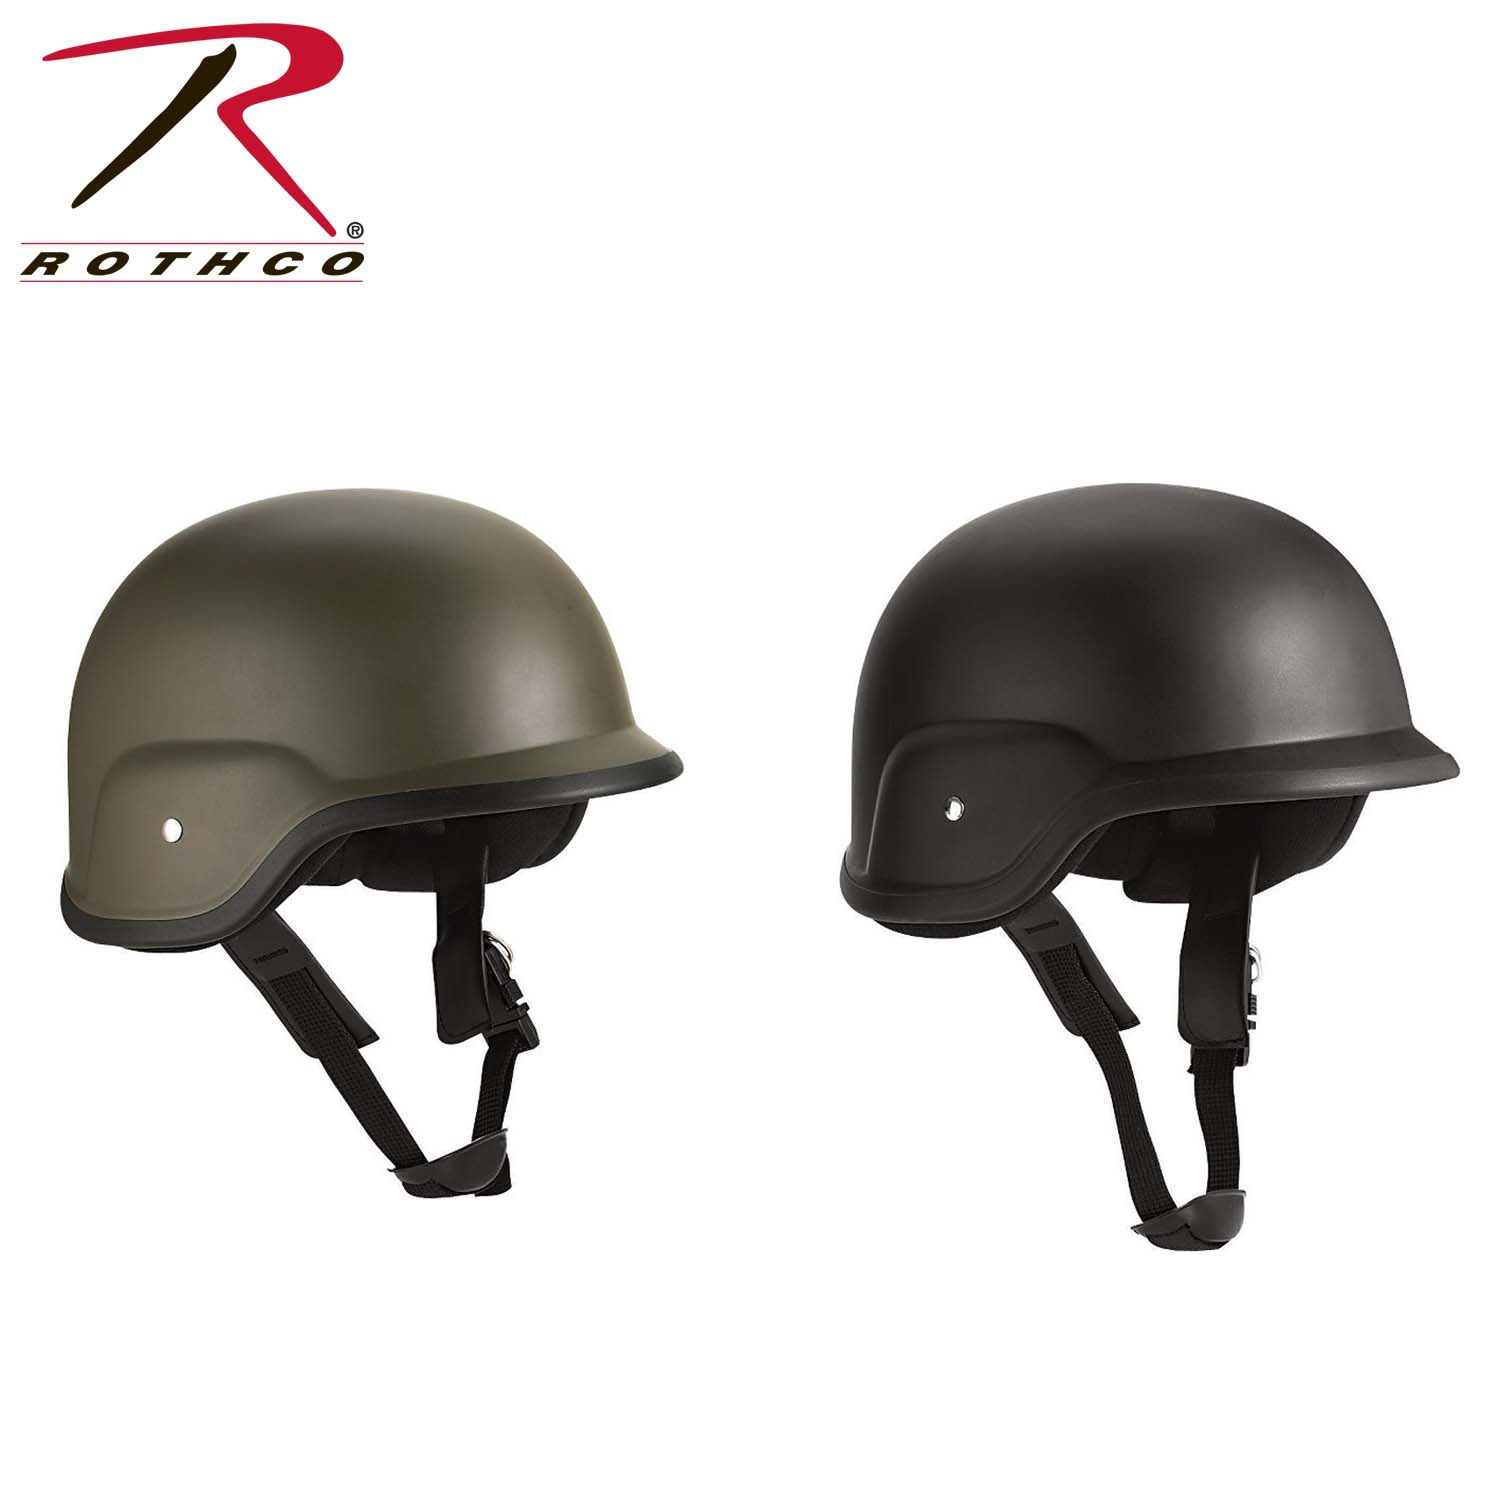 Rothco GI Style Military ABS Plastic MICH-2000 Tactical Helmet & Strap 